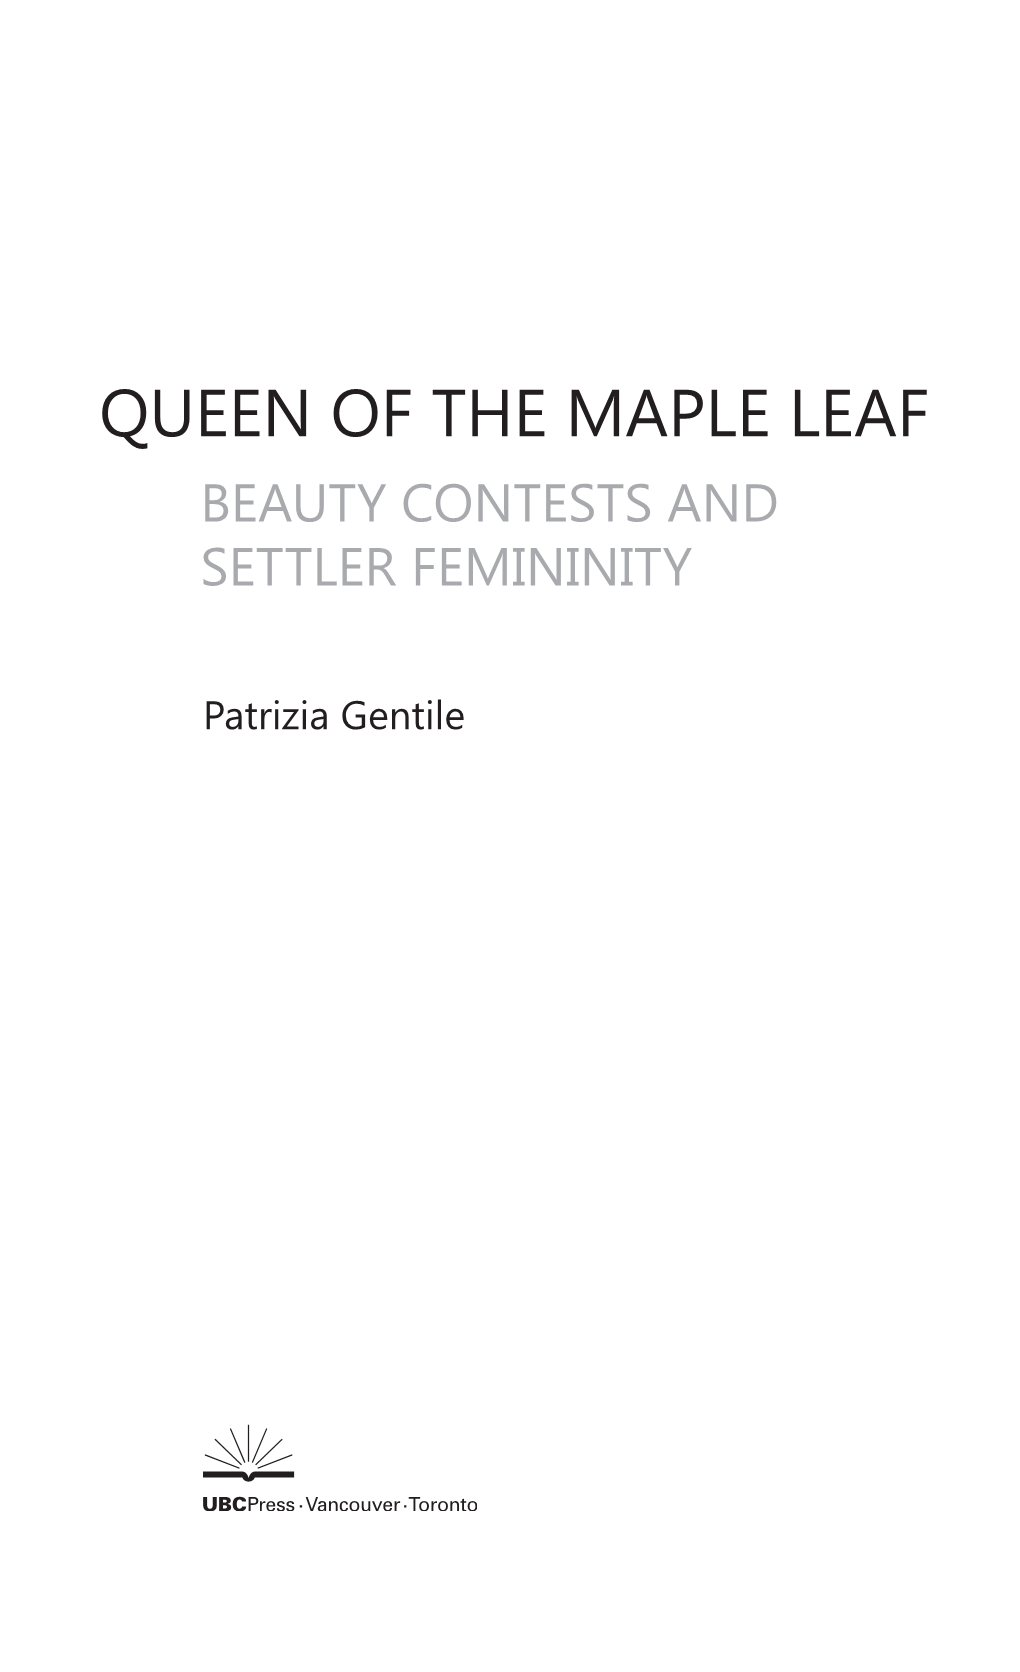 Queen of the Maple Leaf Beauty Contests and Settler Femininity